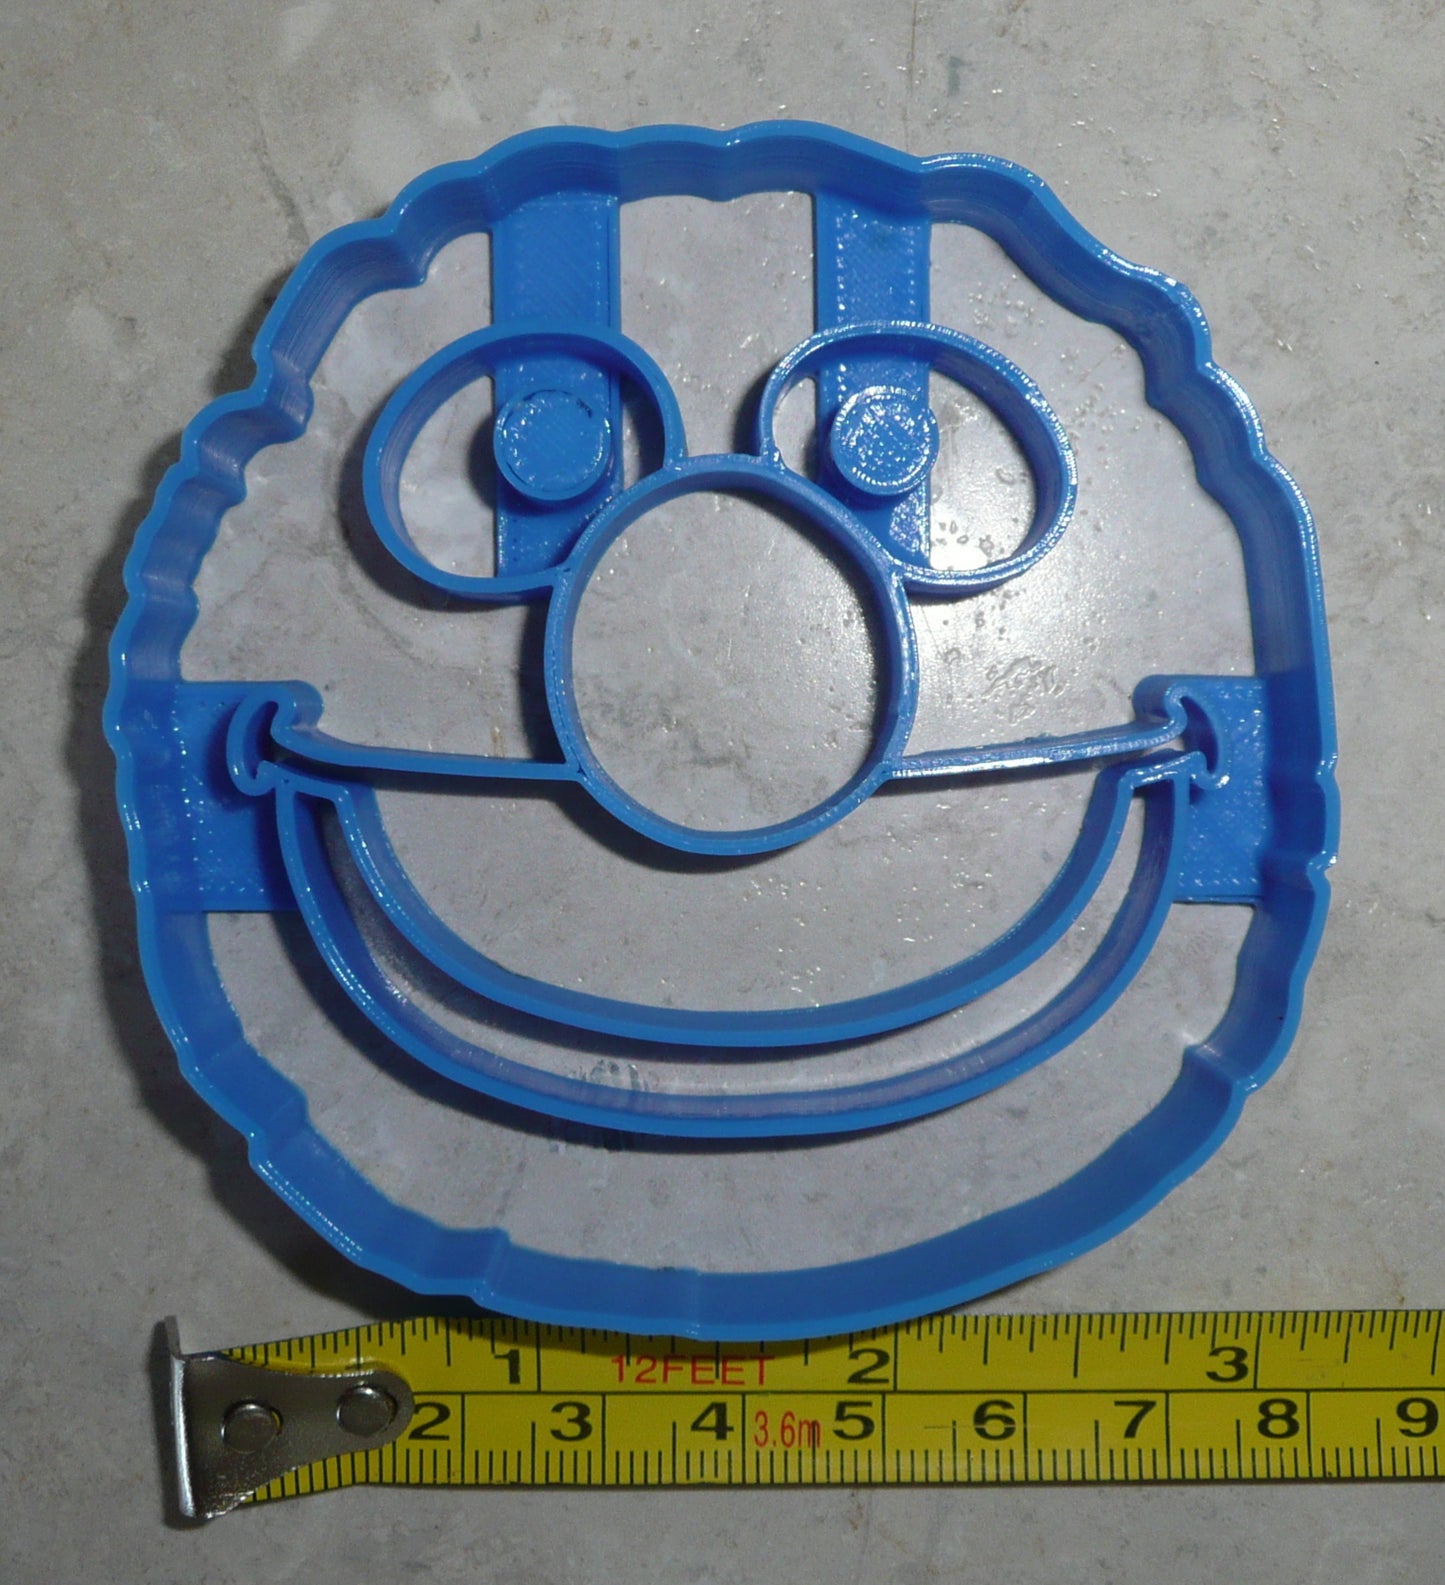 Grover Face Sesame Street Muppet Show Character Cookie Cutter Made In USA PR2249